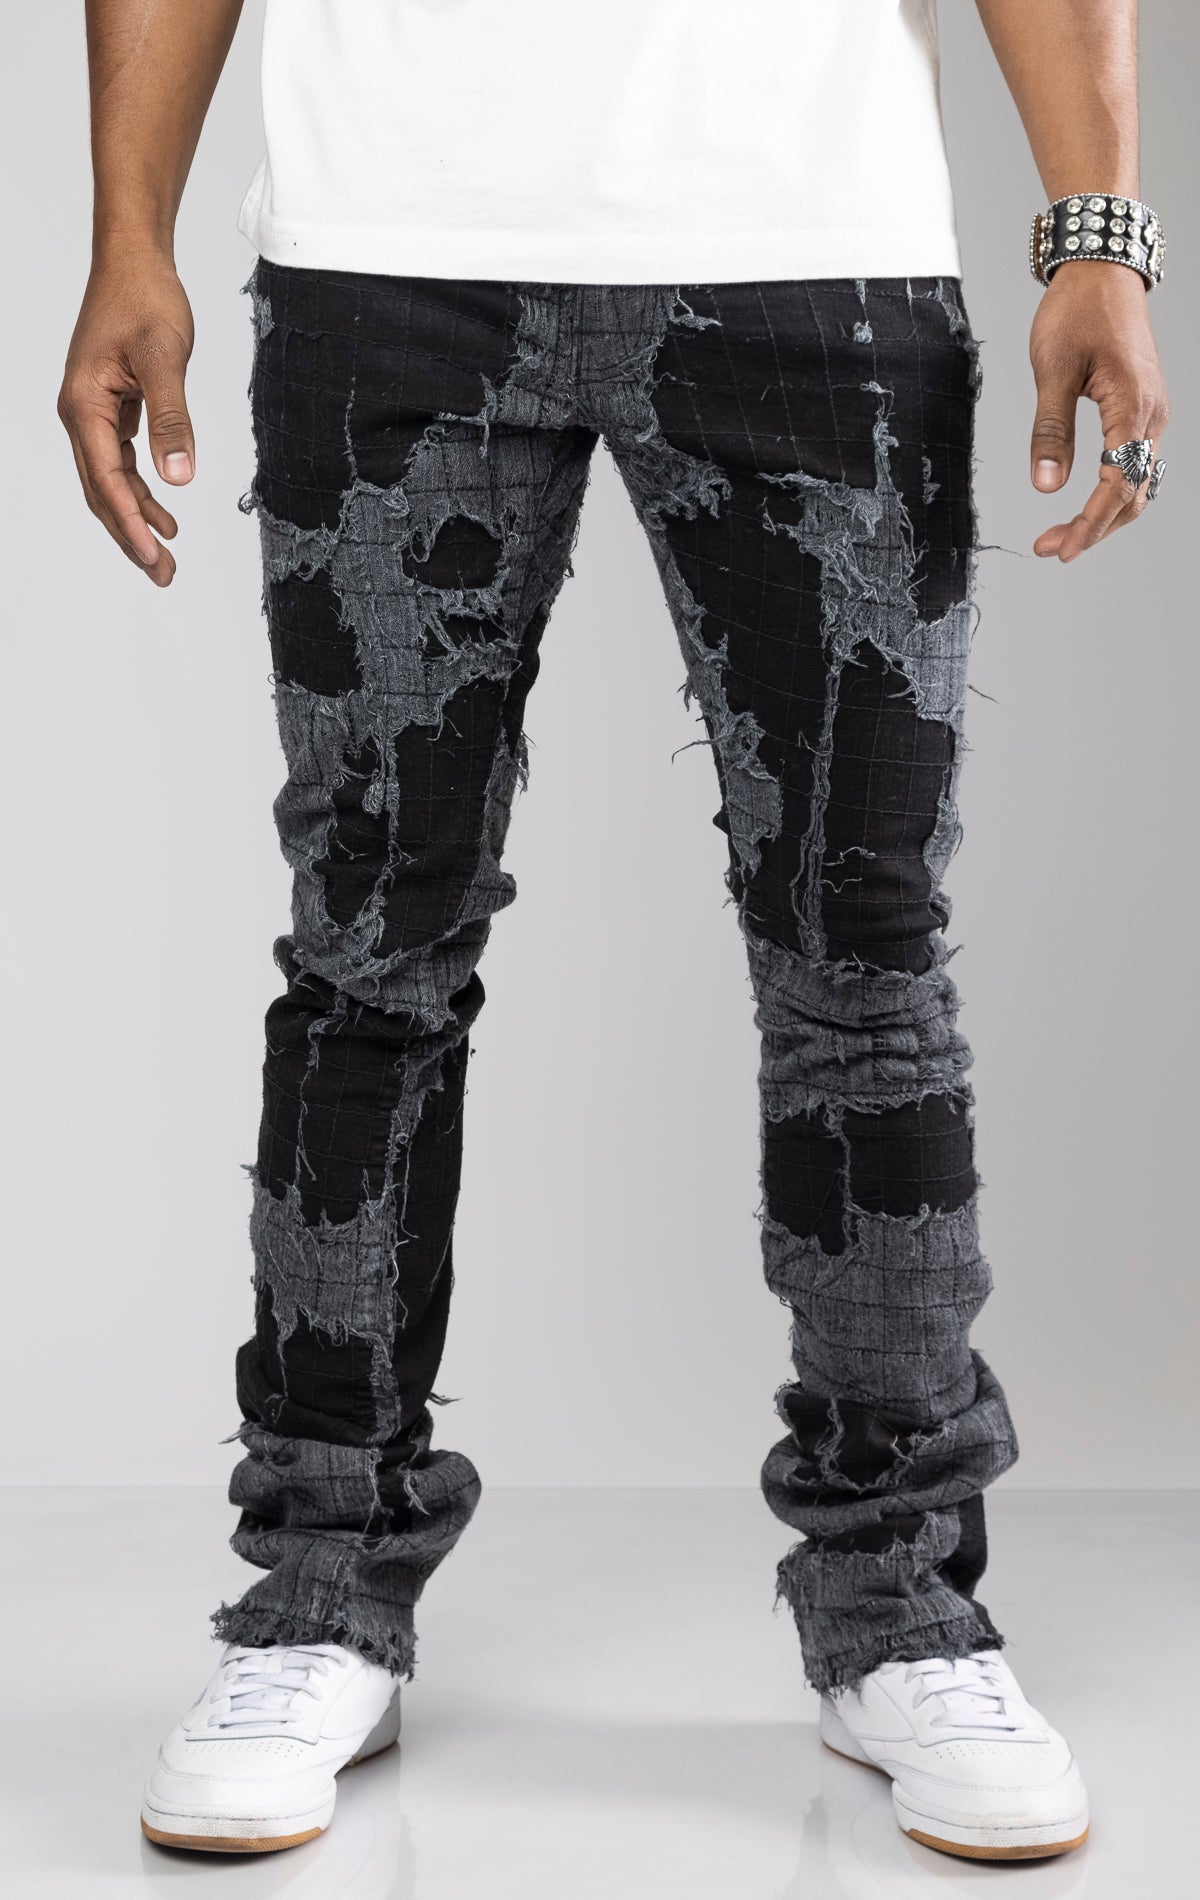 Distressed skinny flare jeans with stacked ankles. Jeans feature all-over gauze patches, intricate stitching, and a ripped and repaired aesthetic.     share   more_vert